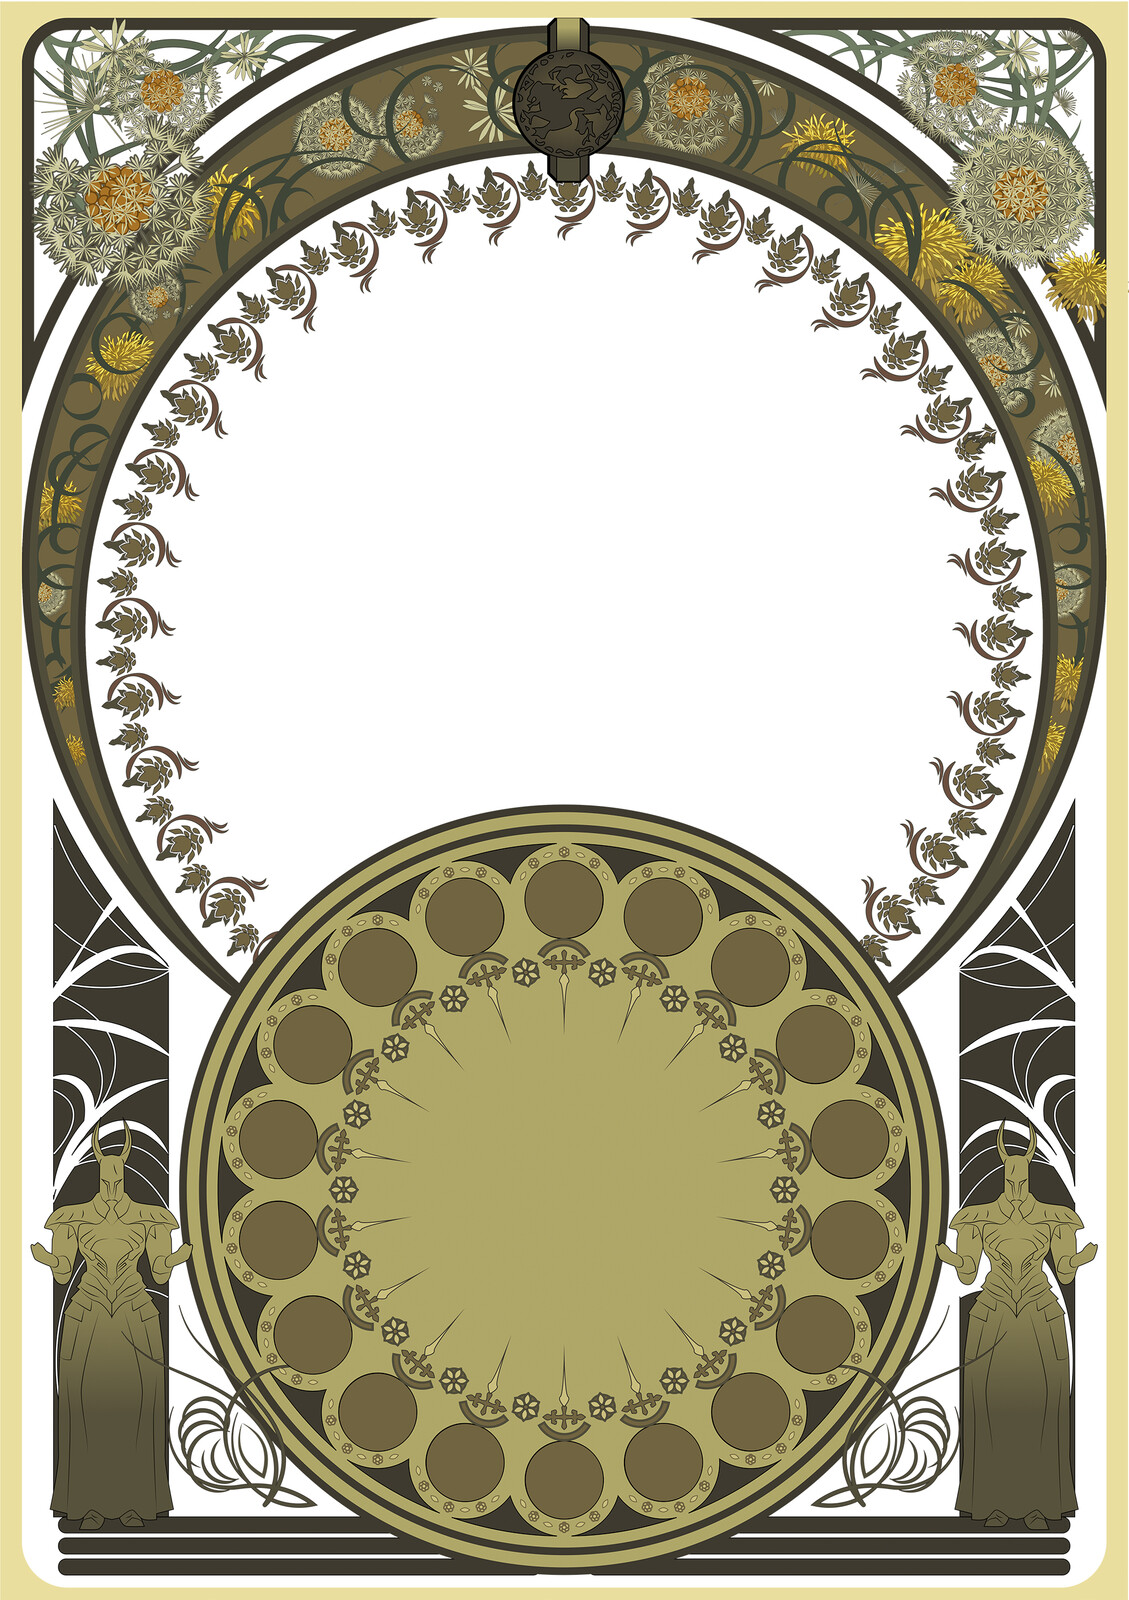 Frame and Architecture made with Illustrator